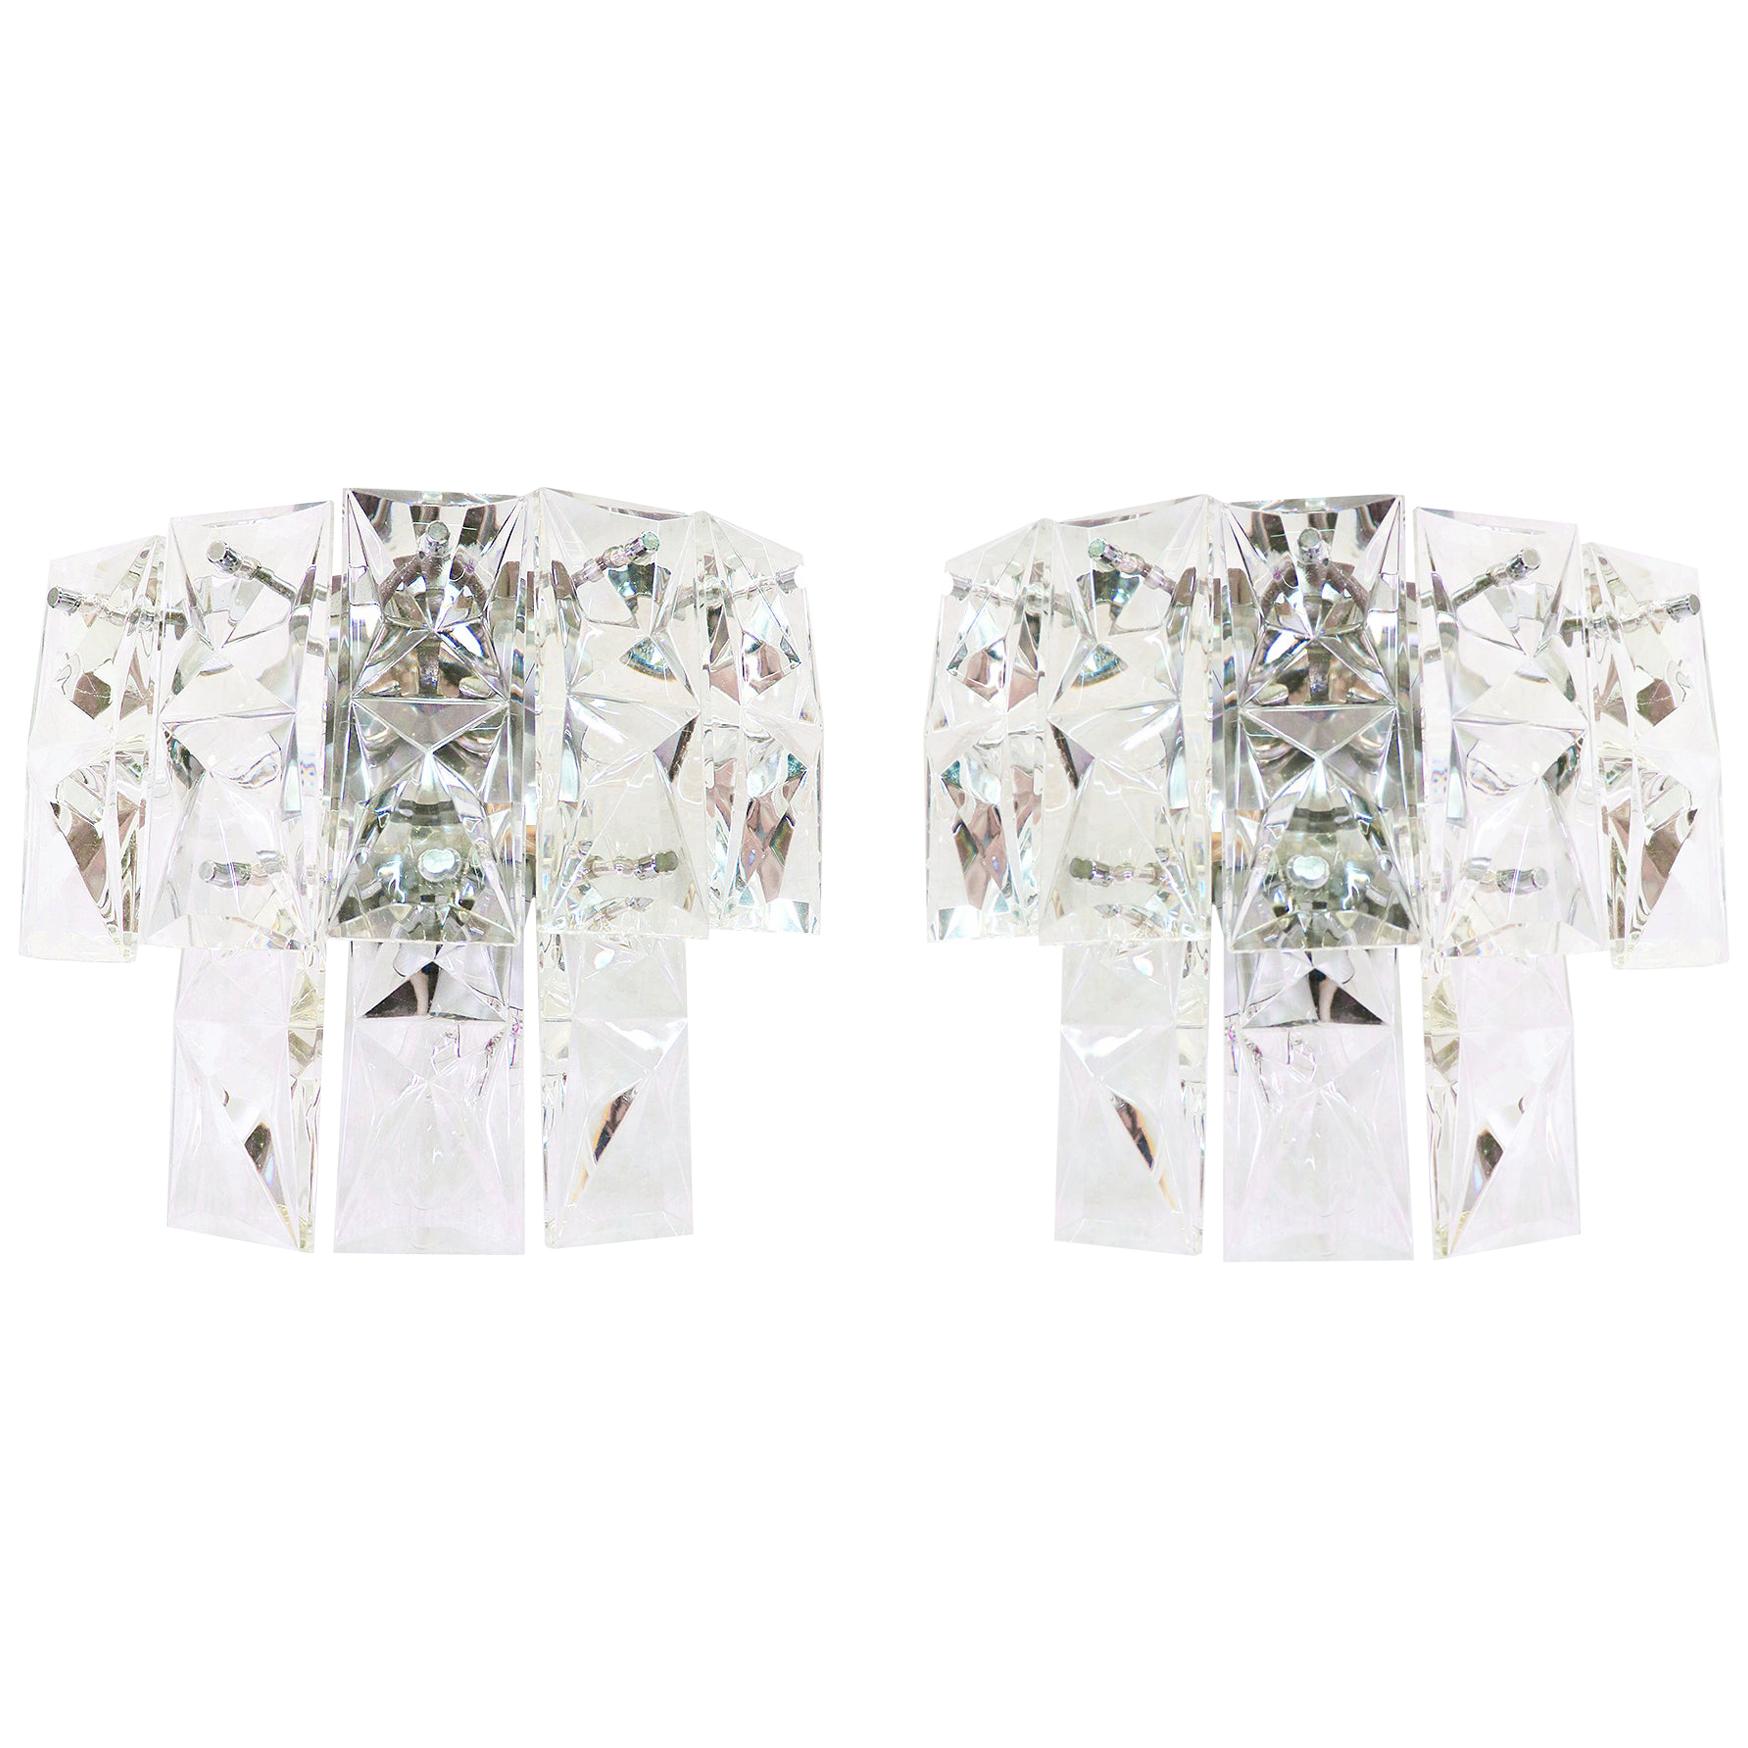 Pair of Faceted Crystal & Chrome Wall Sconces by Kinkeldey, Germany 1960s